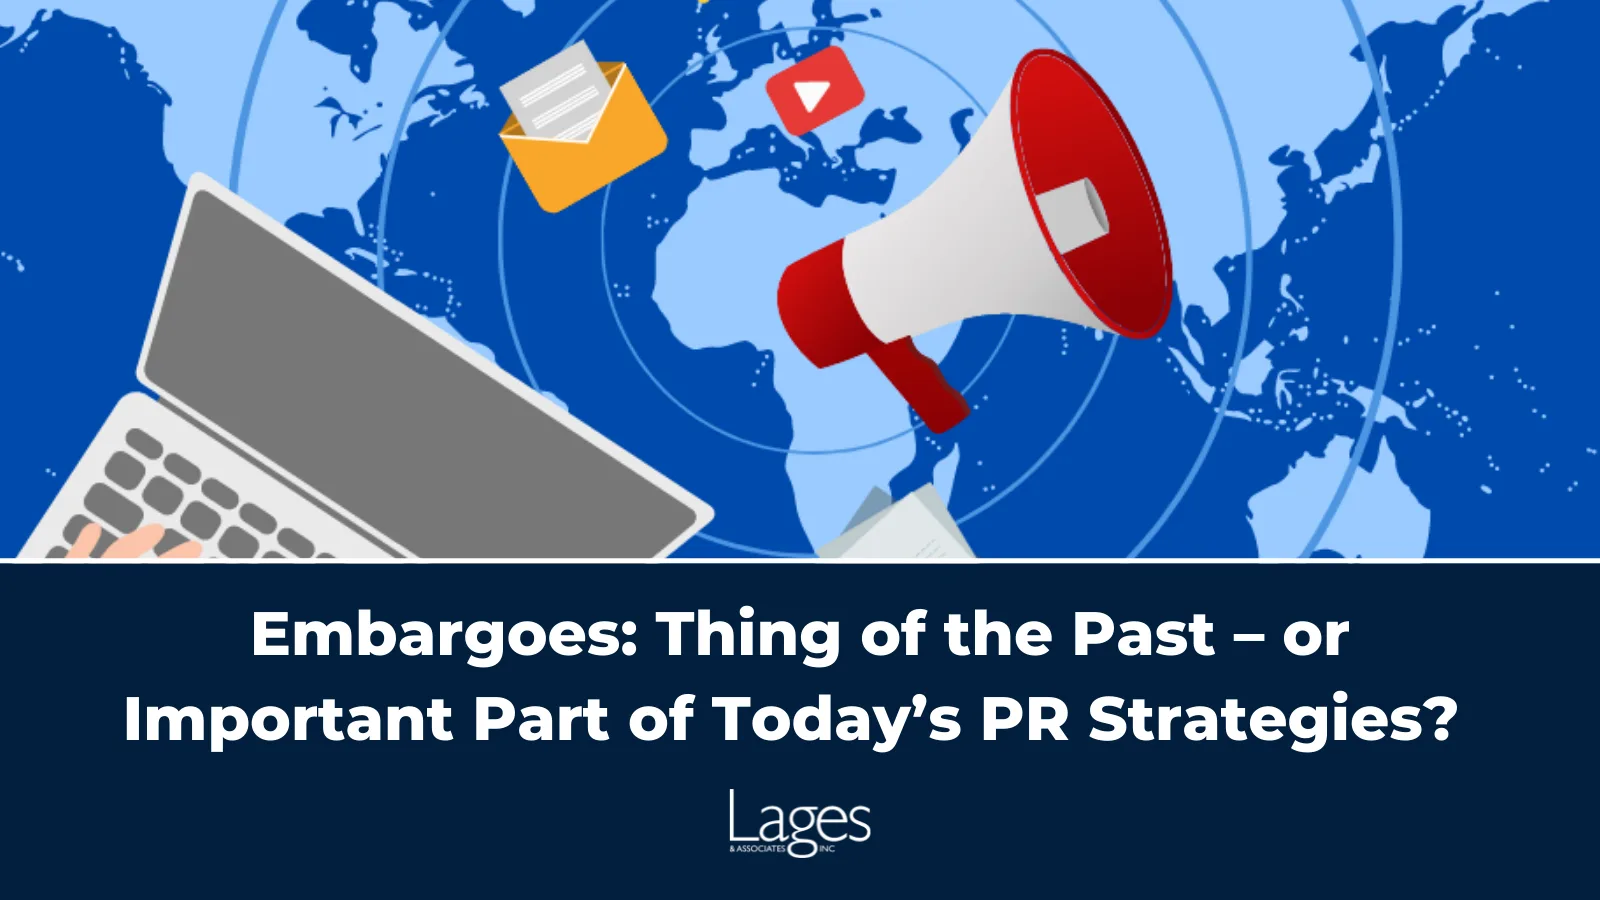 Embargoes: Thing of the Past – or Important Part of Today’s PR Strategies?